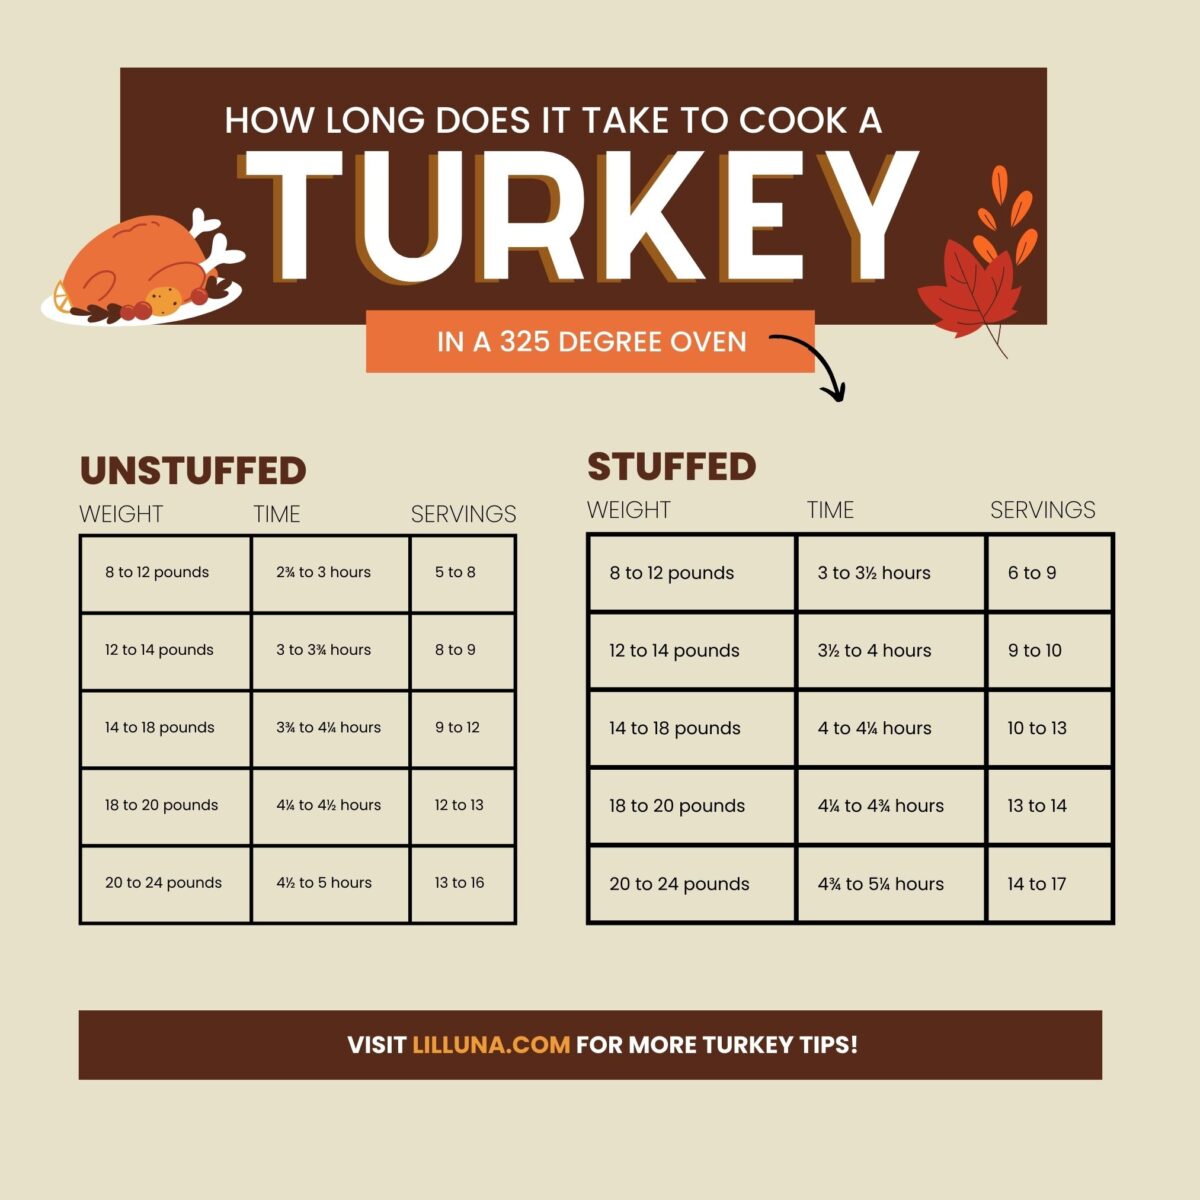 How long does it take to cook a turkey graphic (in a 325 degree oven).